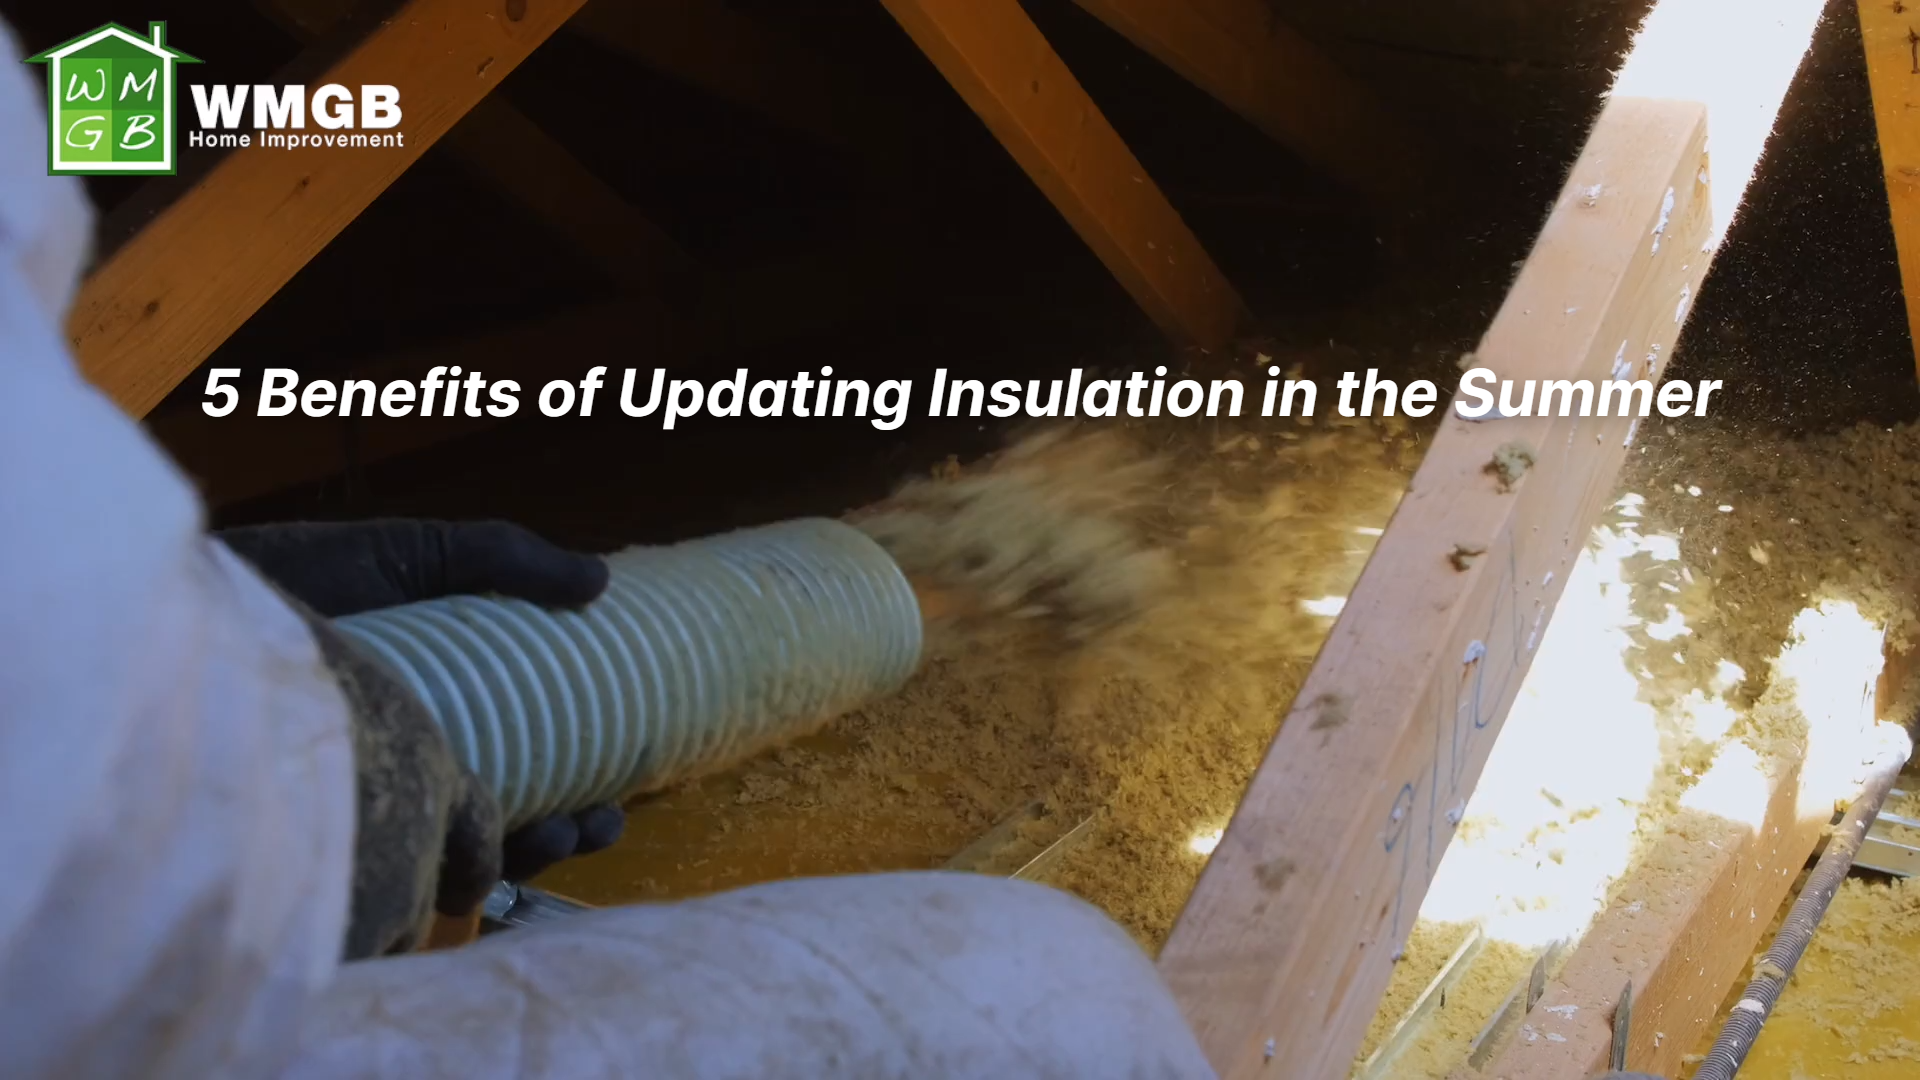 WMGB Videographic - 5 Benefits of Upgrading Insulation in the Summer